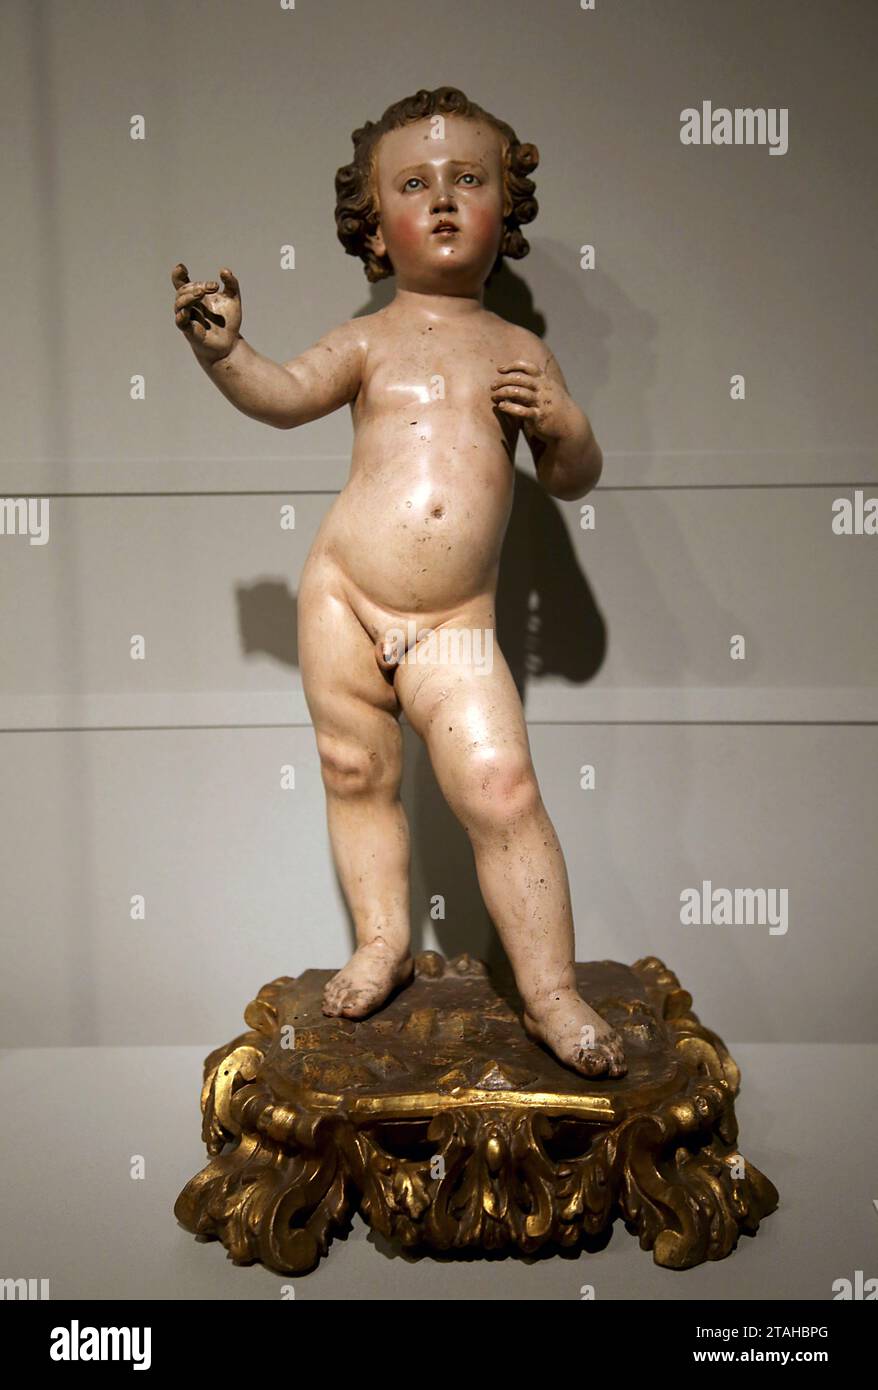 Child Jesus (c. 1750-1770) Carved and polychromed wood. Francisco Salzillo ( 1707-1783). Baroque period sculptor. Museu Marés, Barcelona. Stock Photo